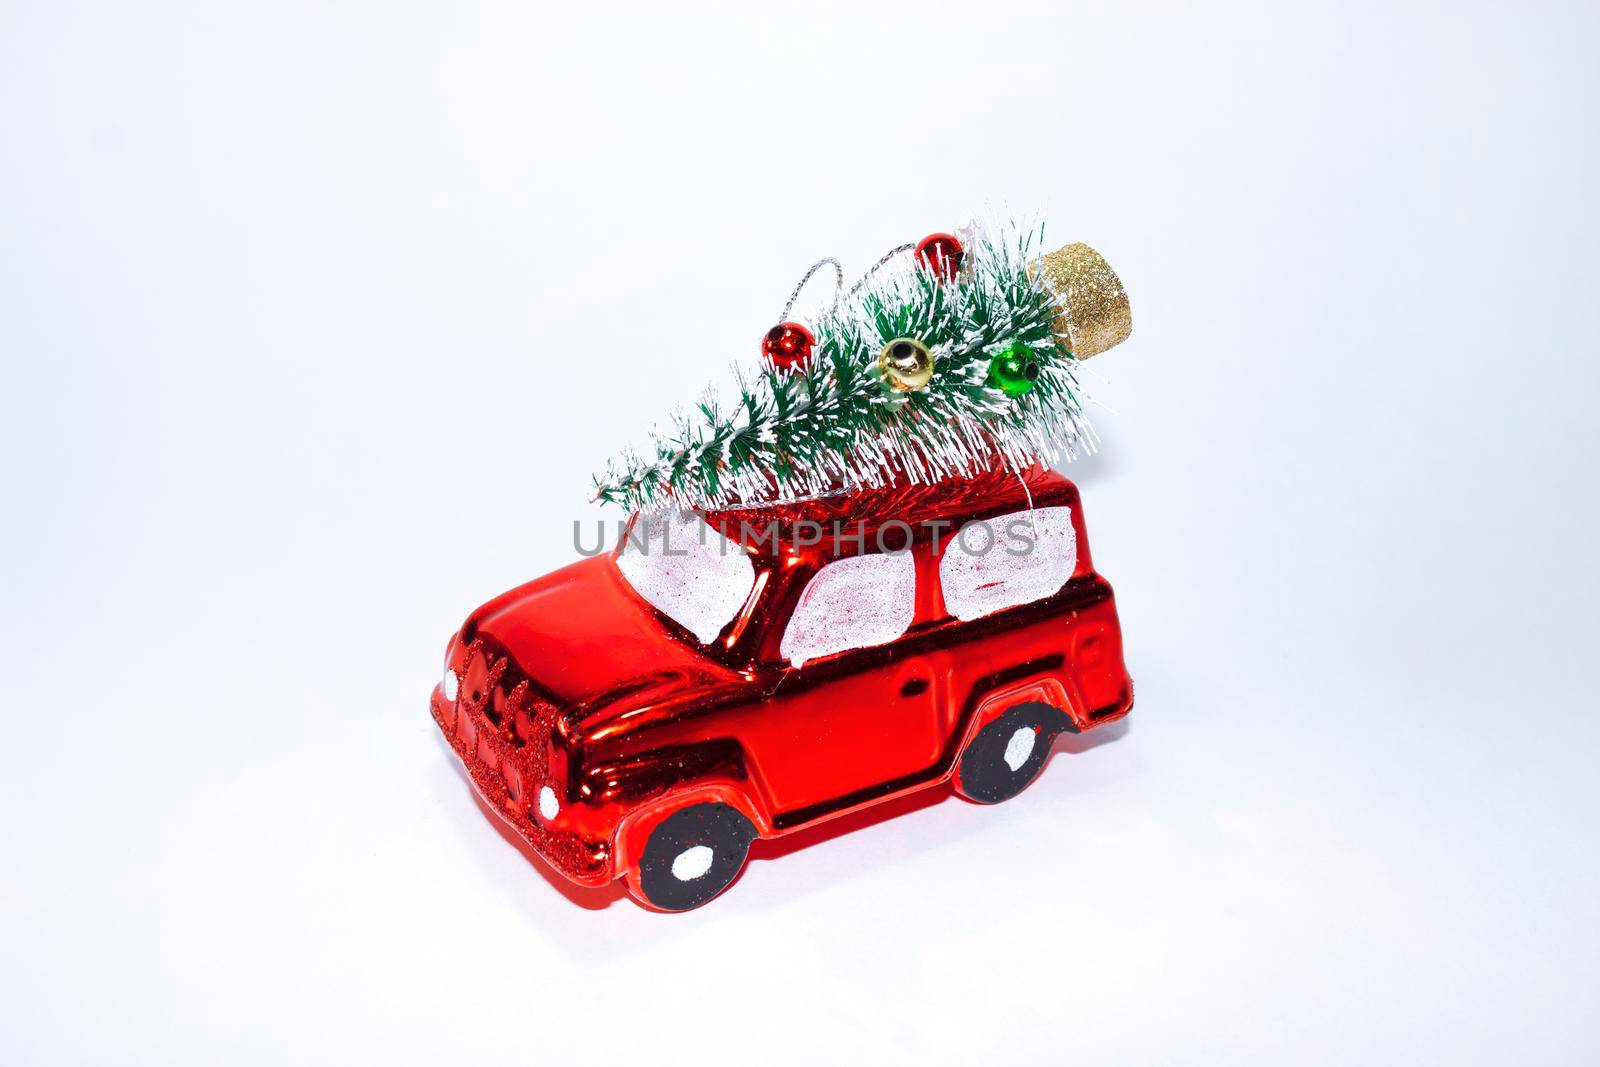 Handmade cardboard car for Christmas decorations by bybyphotography